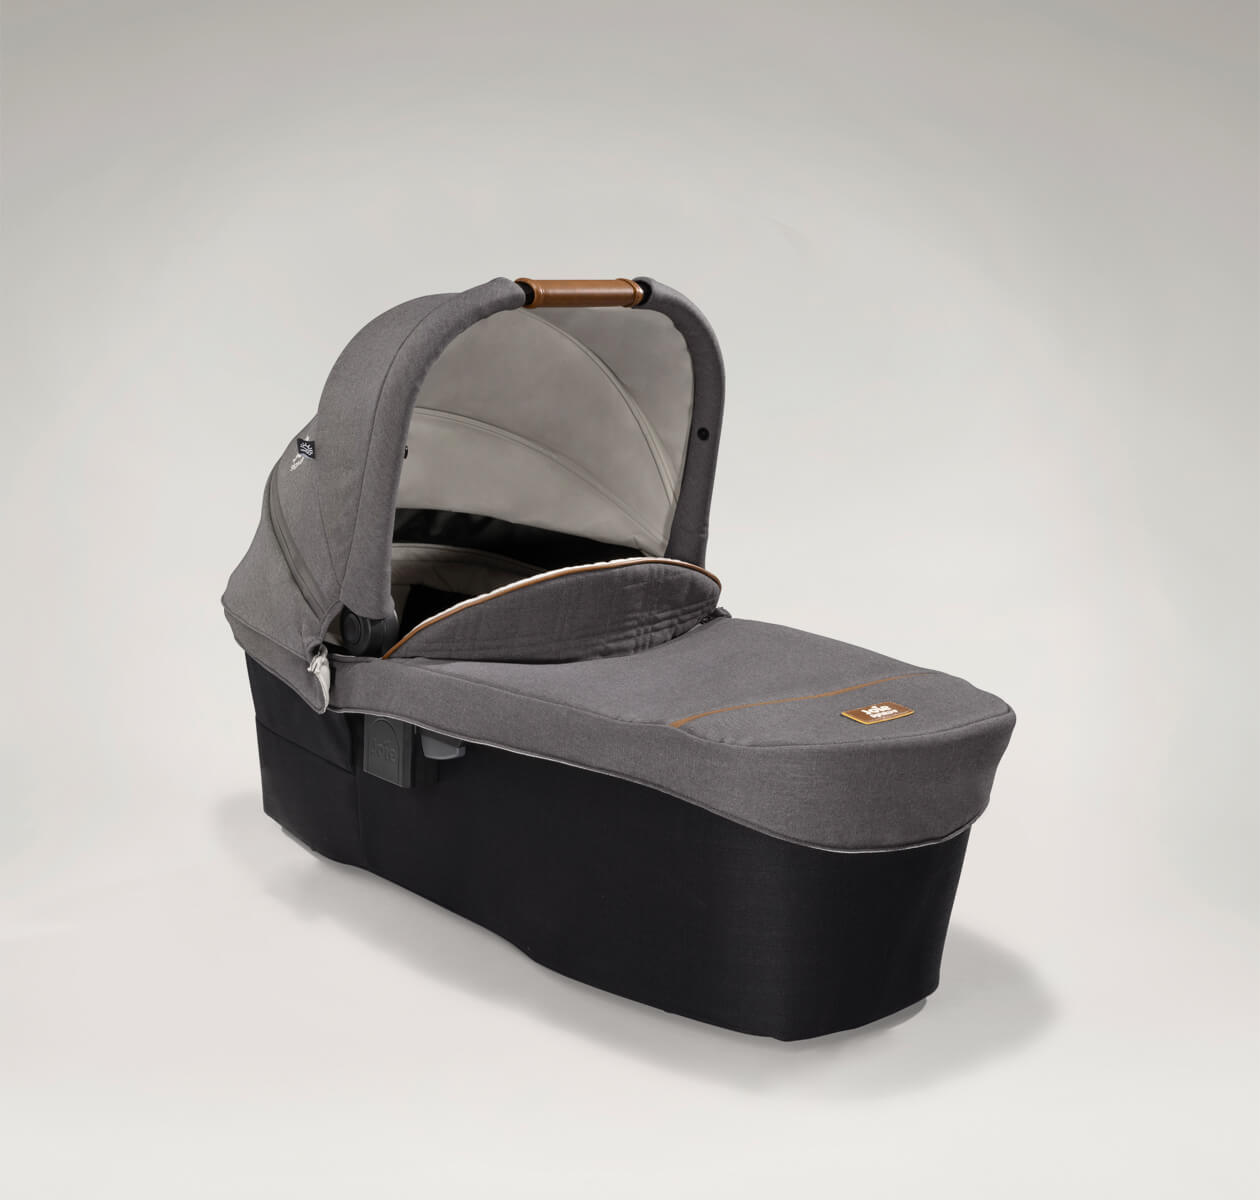 Joie Signature ramble xl carry cot in dark and light gray at a right angle with hood raised.